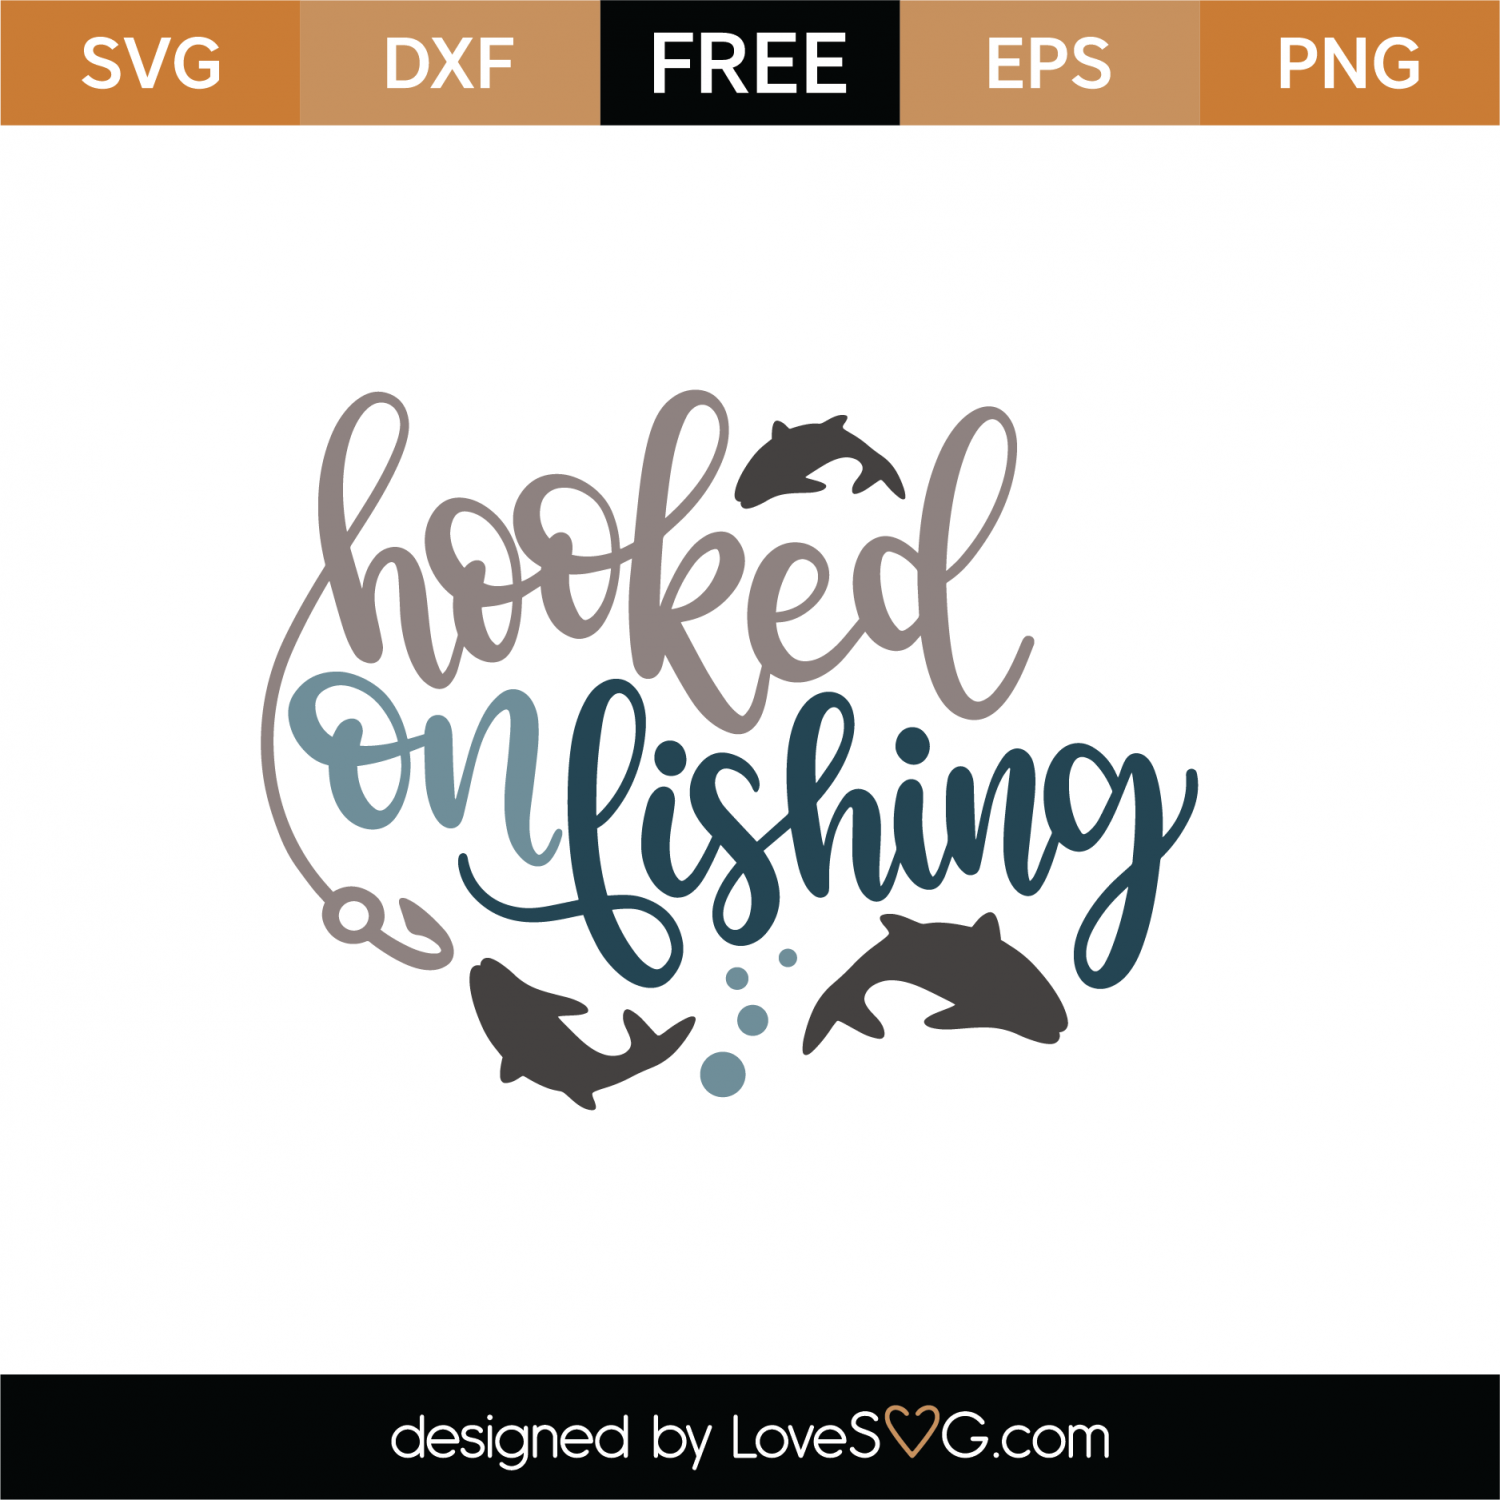 Download Free Hooked On Fishing SVG Cut File | Lovesvg.com